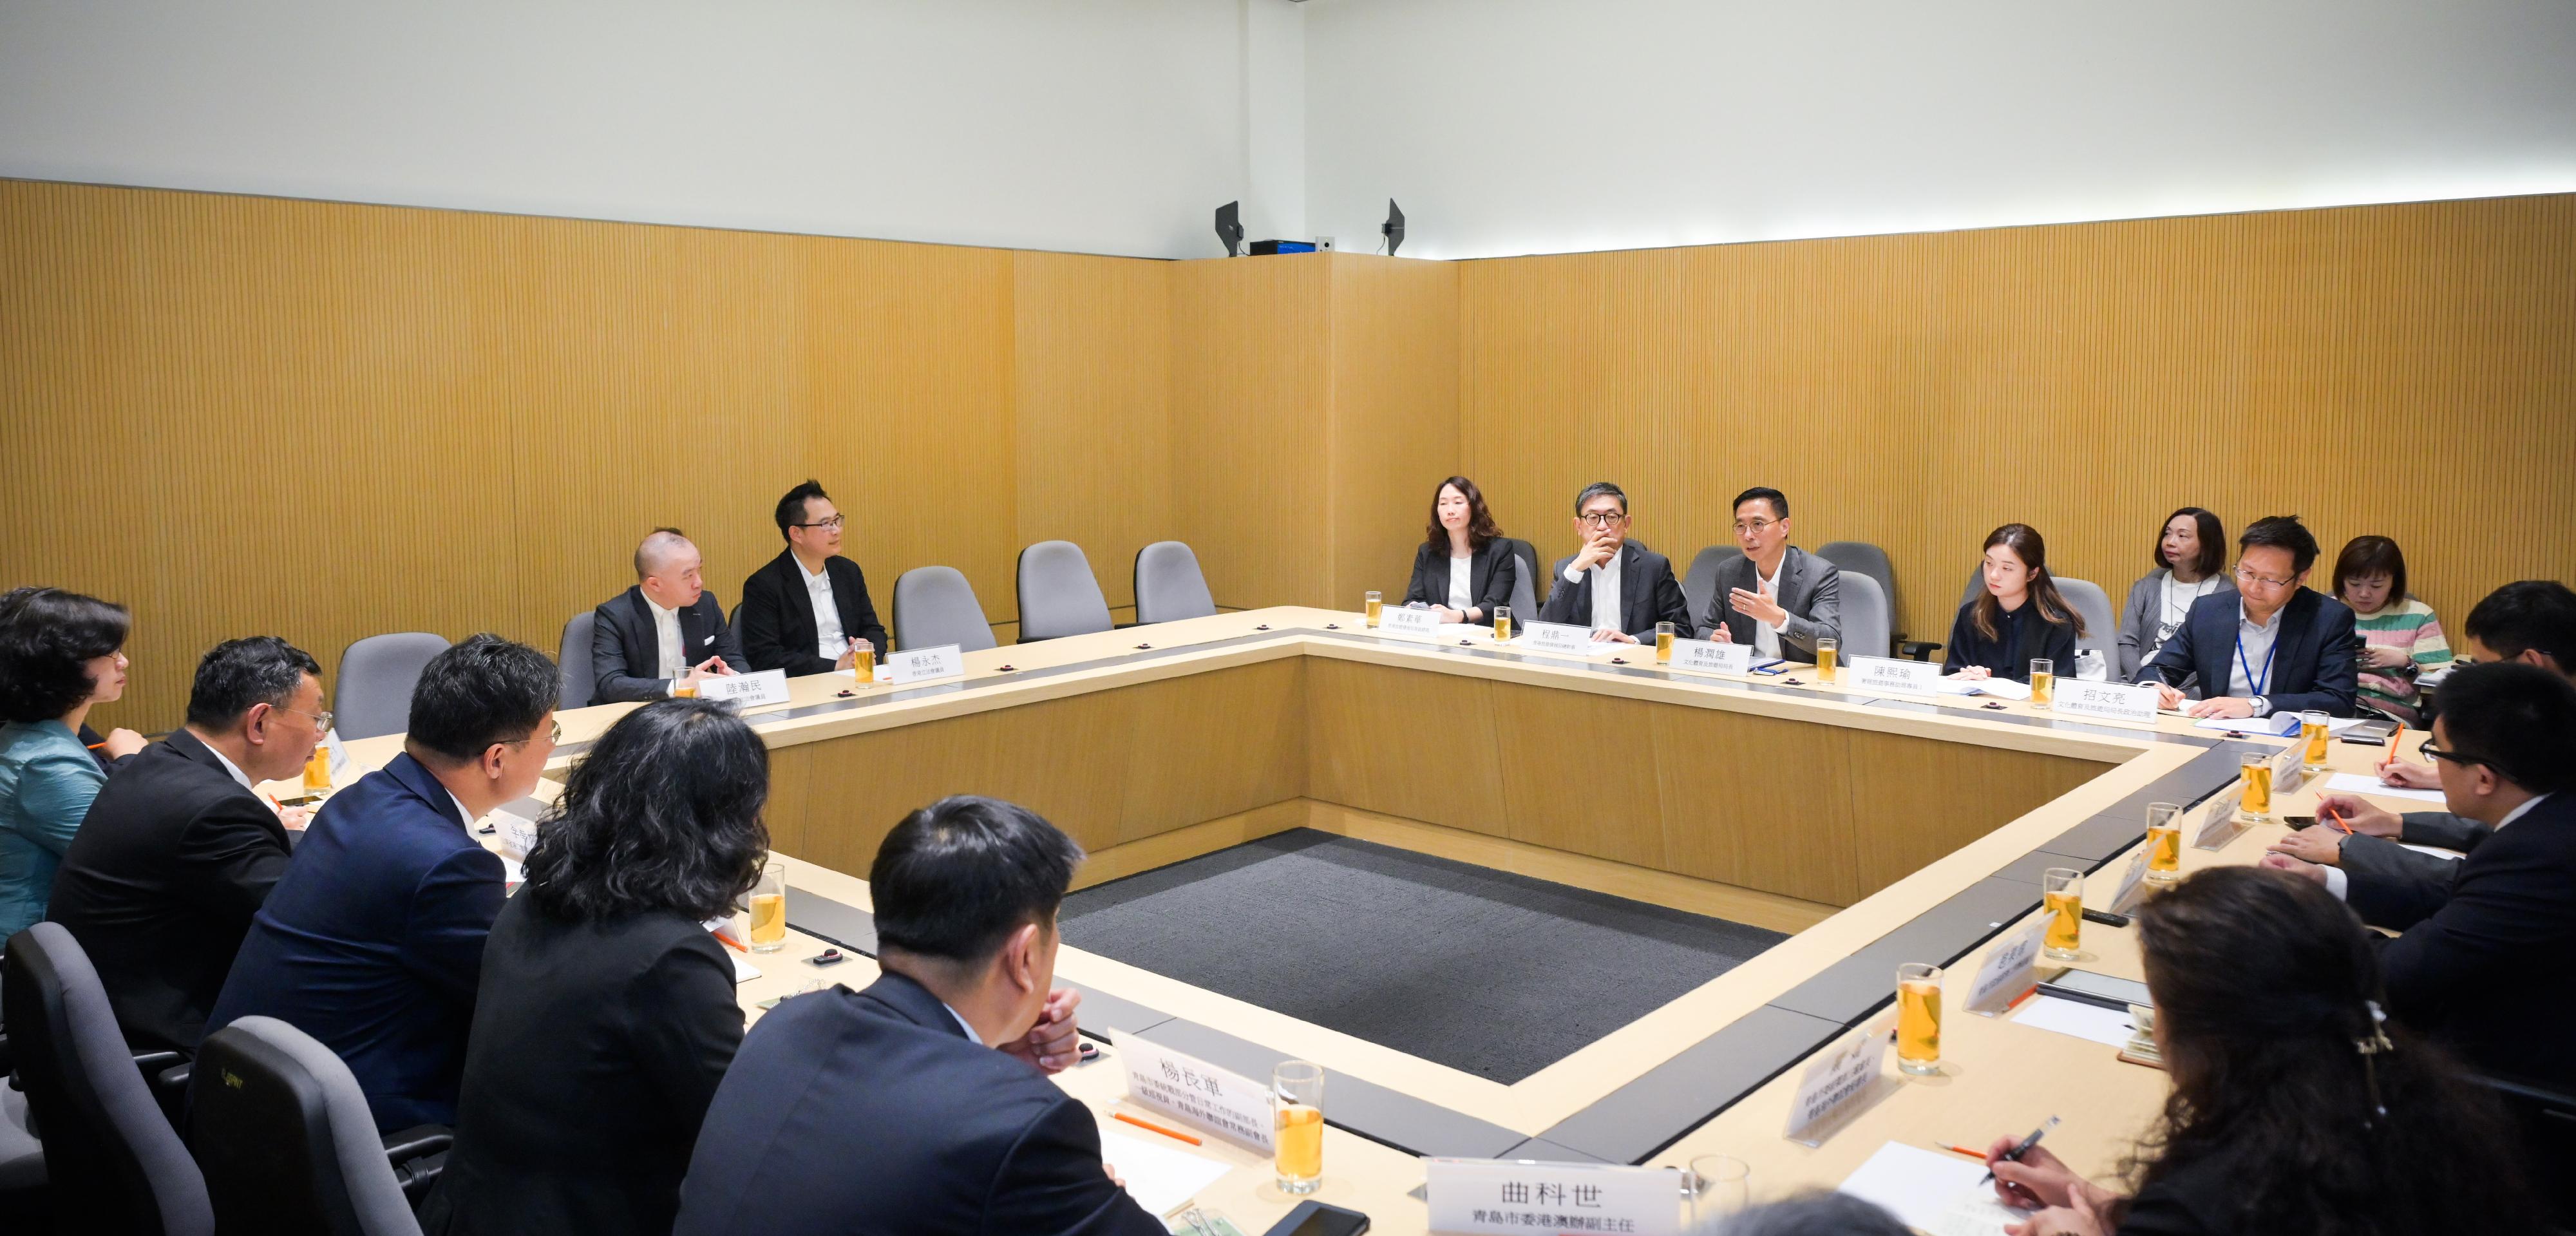 The Secretary for Culture, Sports and Tourism, Mr Kevin Yeung, today (April 24) met with the Chairman of the Chinese People's Political Consultative Conference Qingdao Municipal Committee, Shandong Province, Mr Meng Qingbin. Photo shows Mr Yeung (third right) briefing Mr Meng (third left) on the latest developments of Hong Kong's tourism.